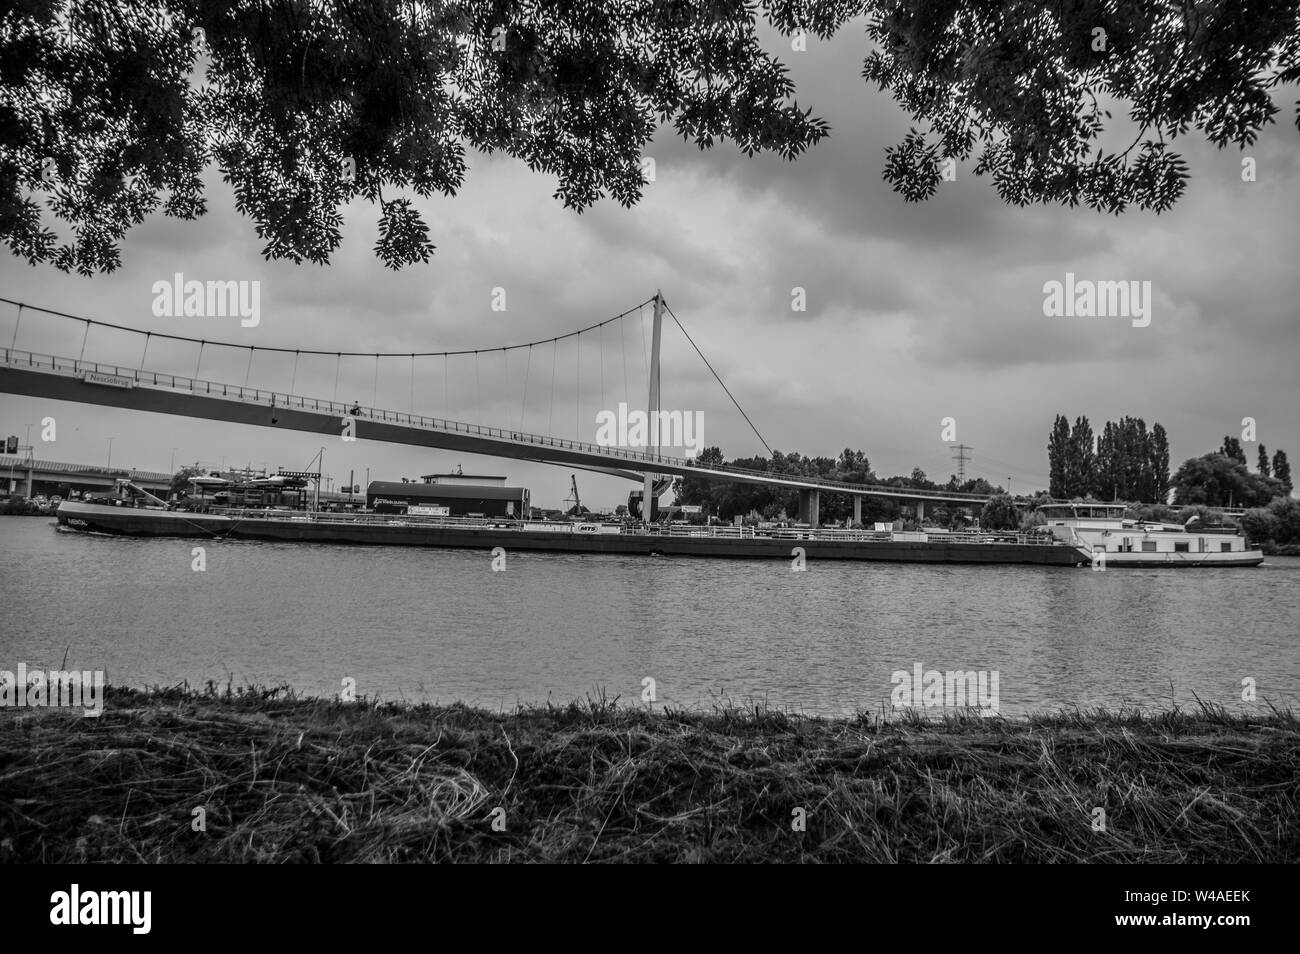 Neciobrug In The Distance In Black And White At Diemen The Netherlands 2019 Stock Photo